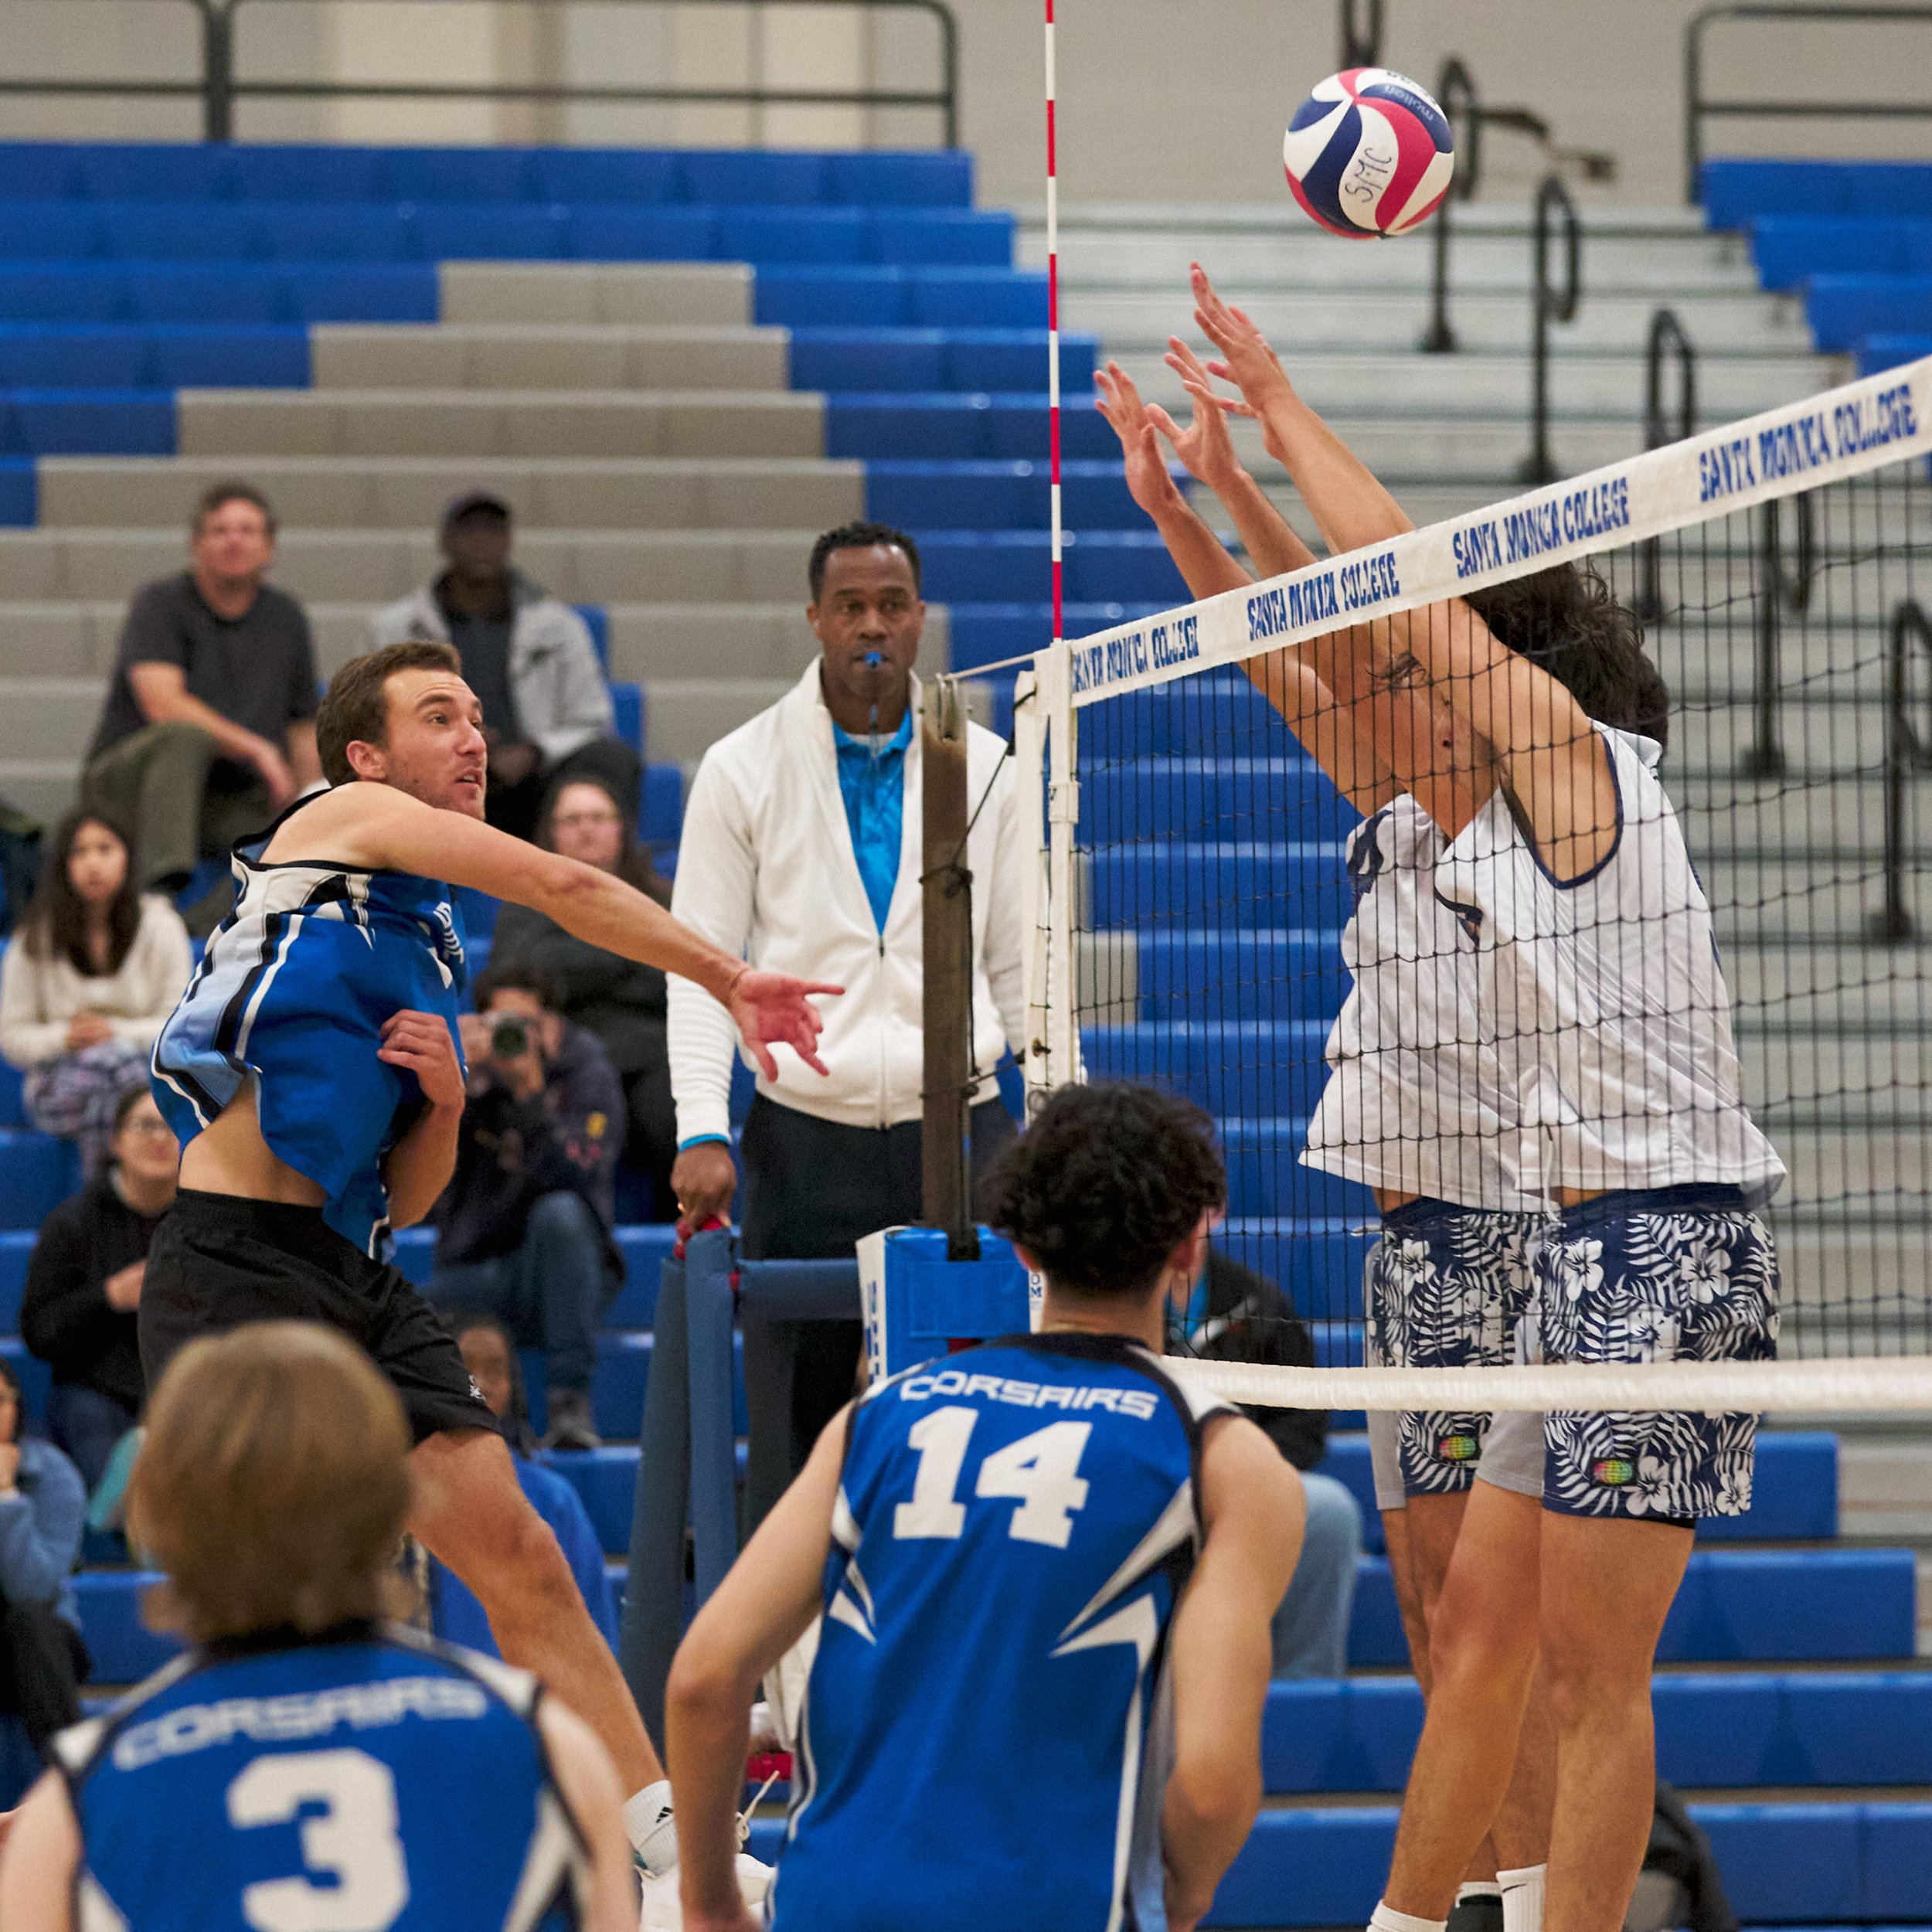  Santa Monica College Corsairs' Kane Schwengel sends the ball past Irvine Valley College Lasers' Julio Gutierrez (right) and Kaina Alvarez (rear right) during the men's volleyball match on Friday, Feb. 24, 2023, at Corsair Gym in Santa Monica, Calif.